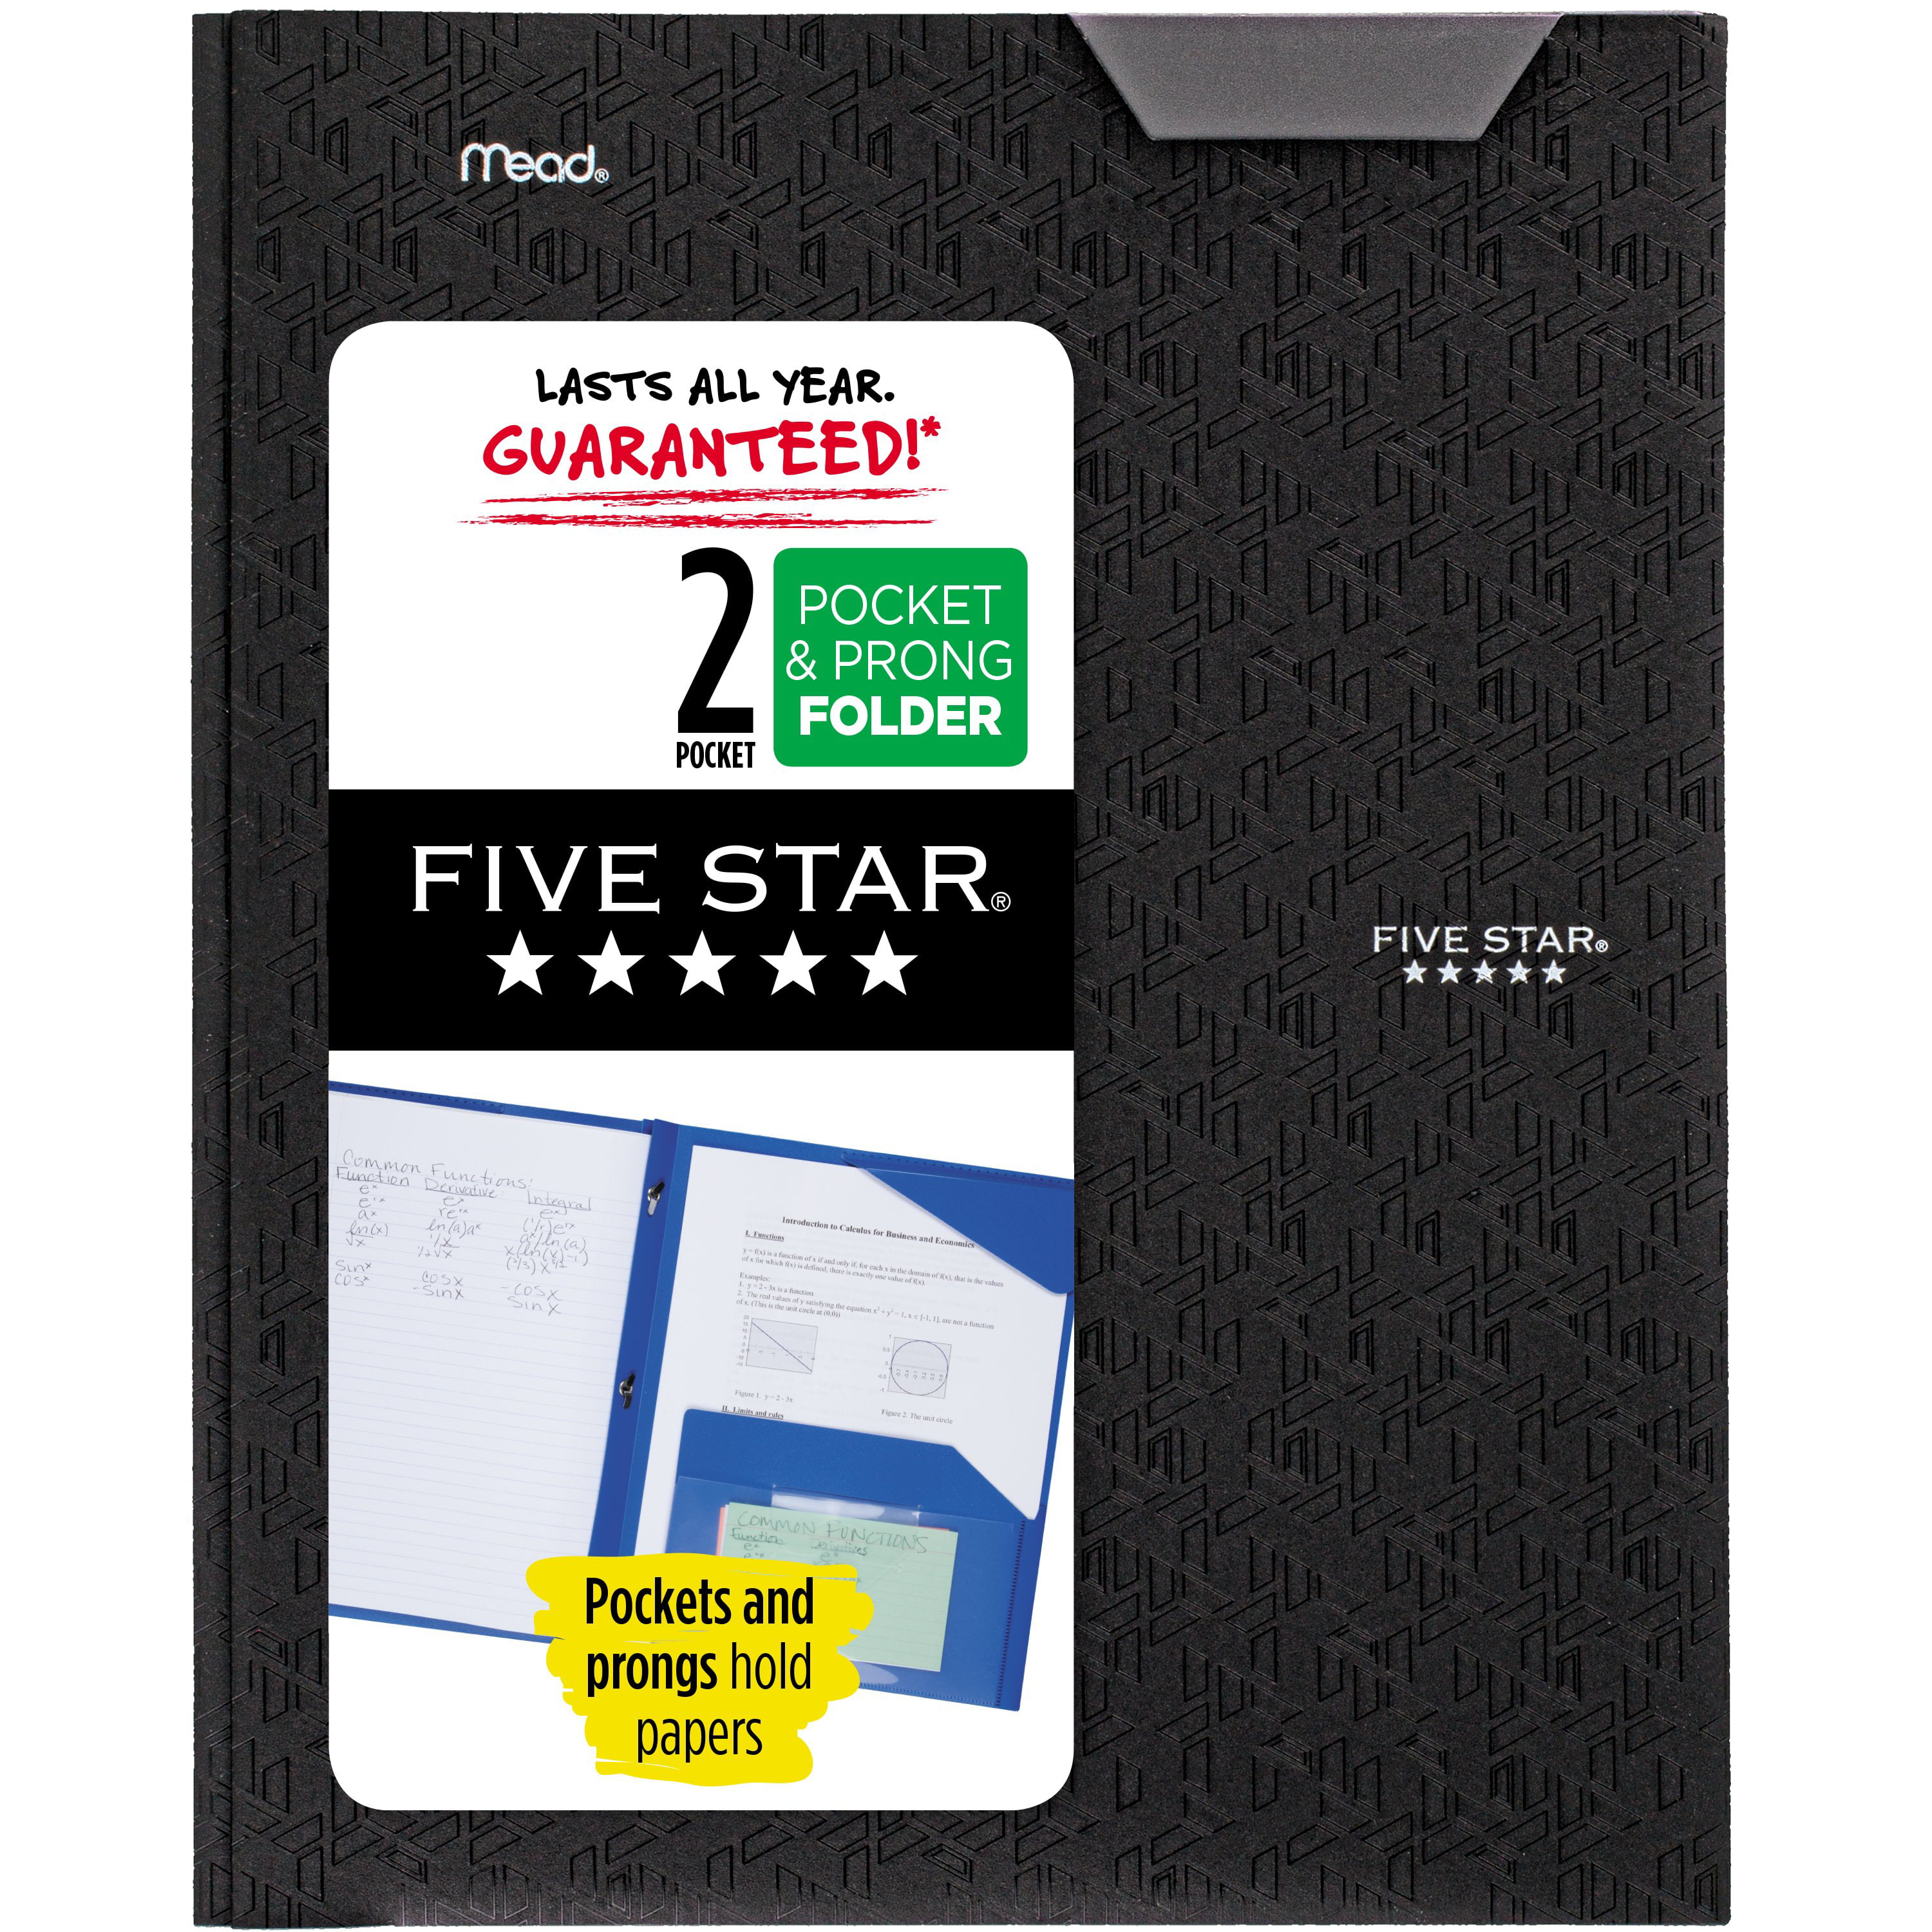 3 Pocket Folders Plastic Colored Folders with Pockets & Prong Fasteners for 3-Ring Binders 1 Count Stay-Put Folders Color Selected for You Assorted 